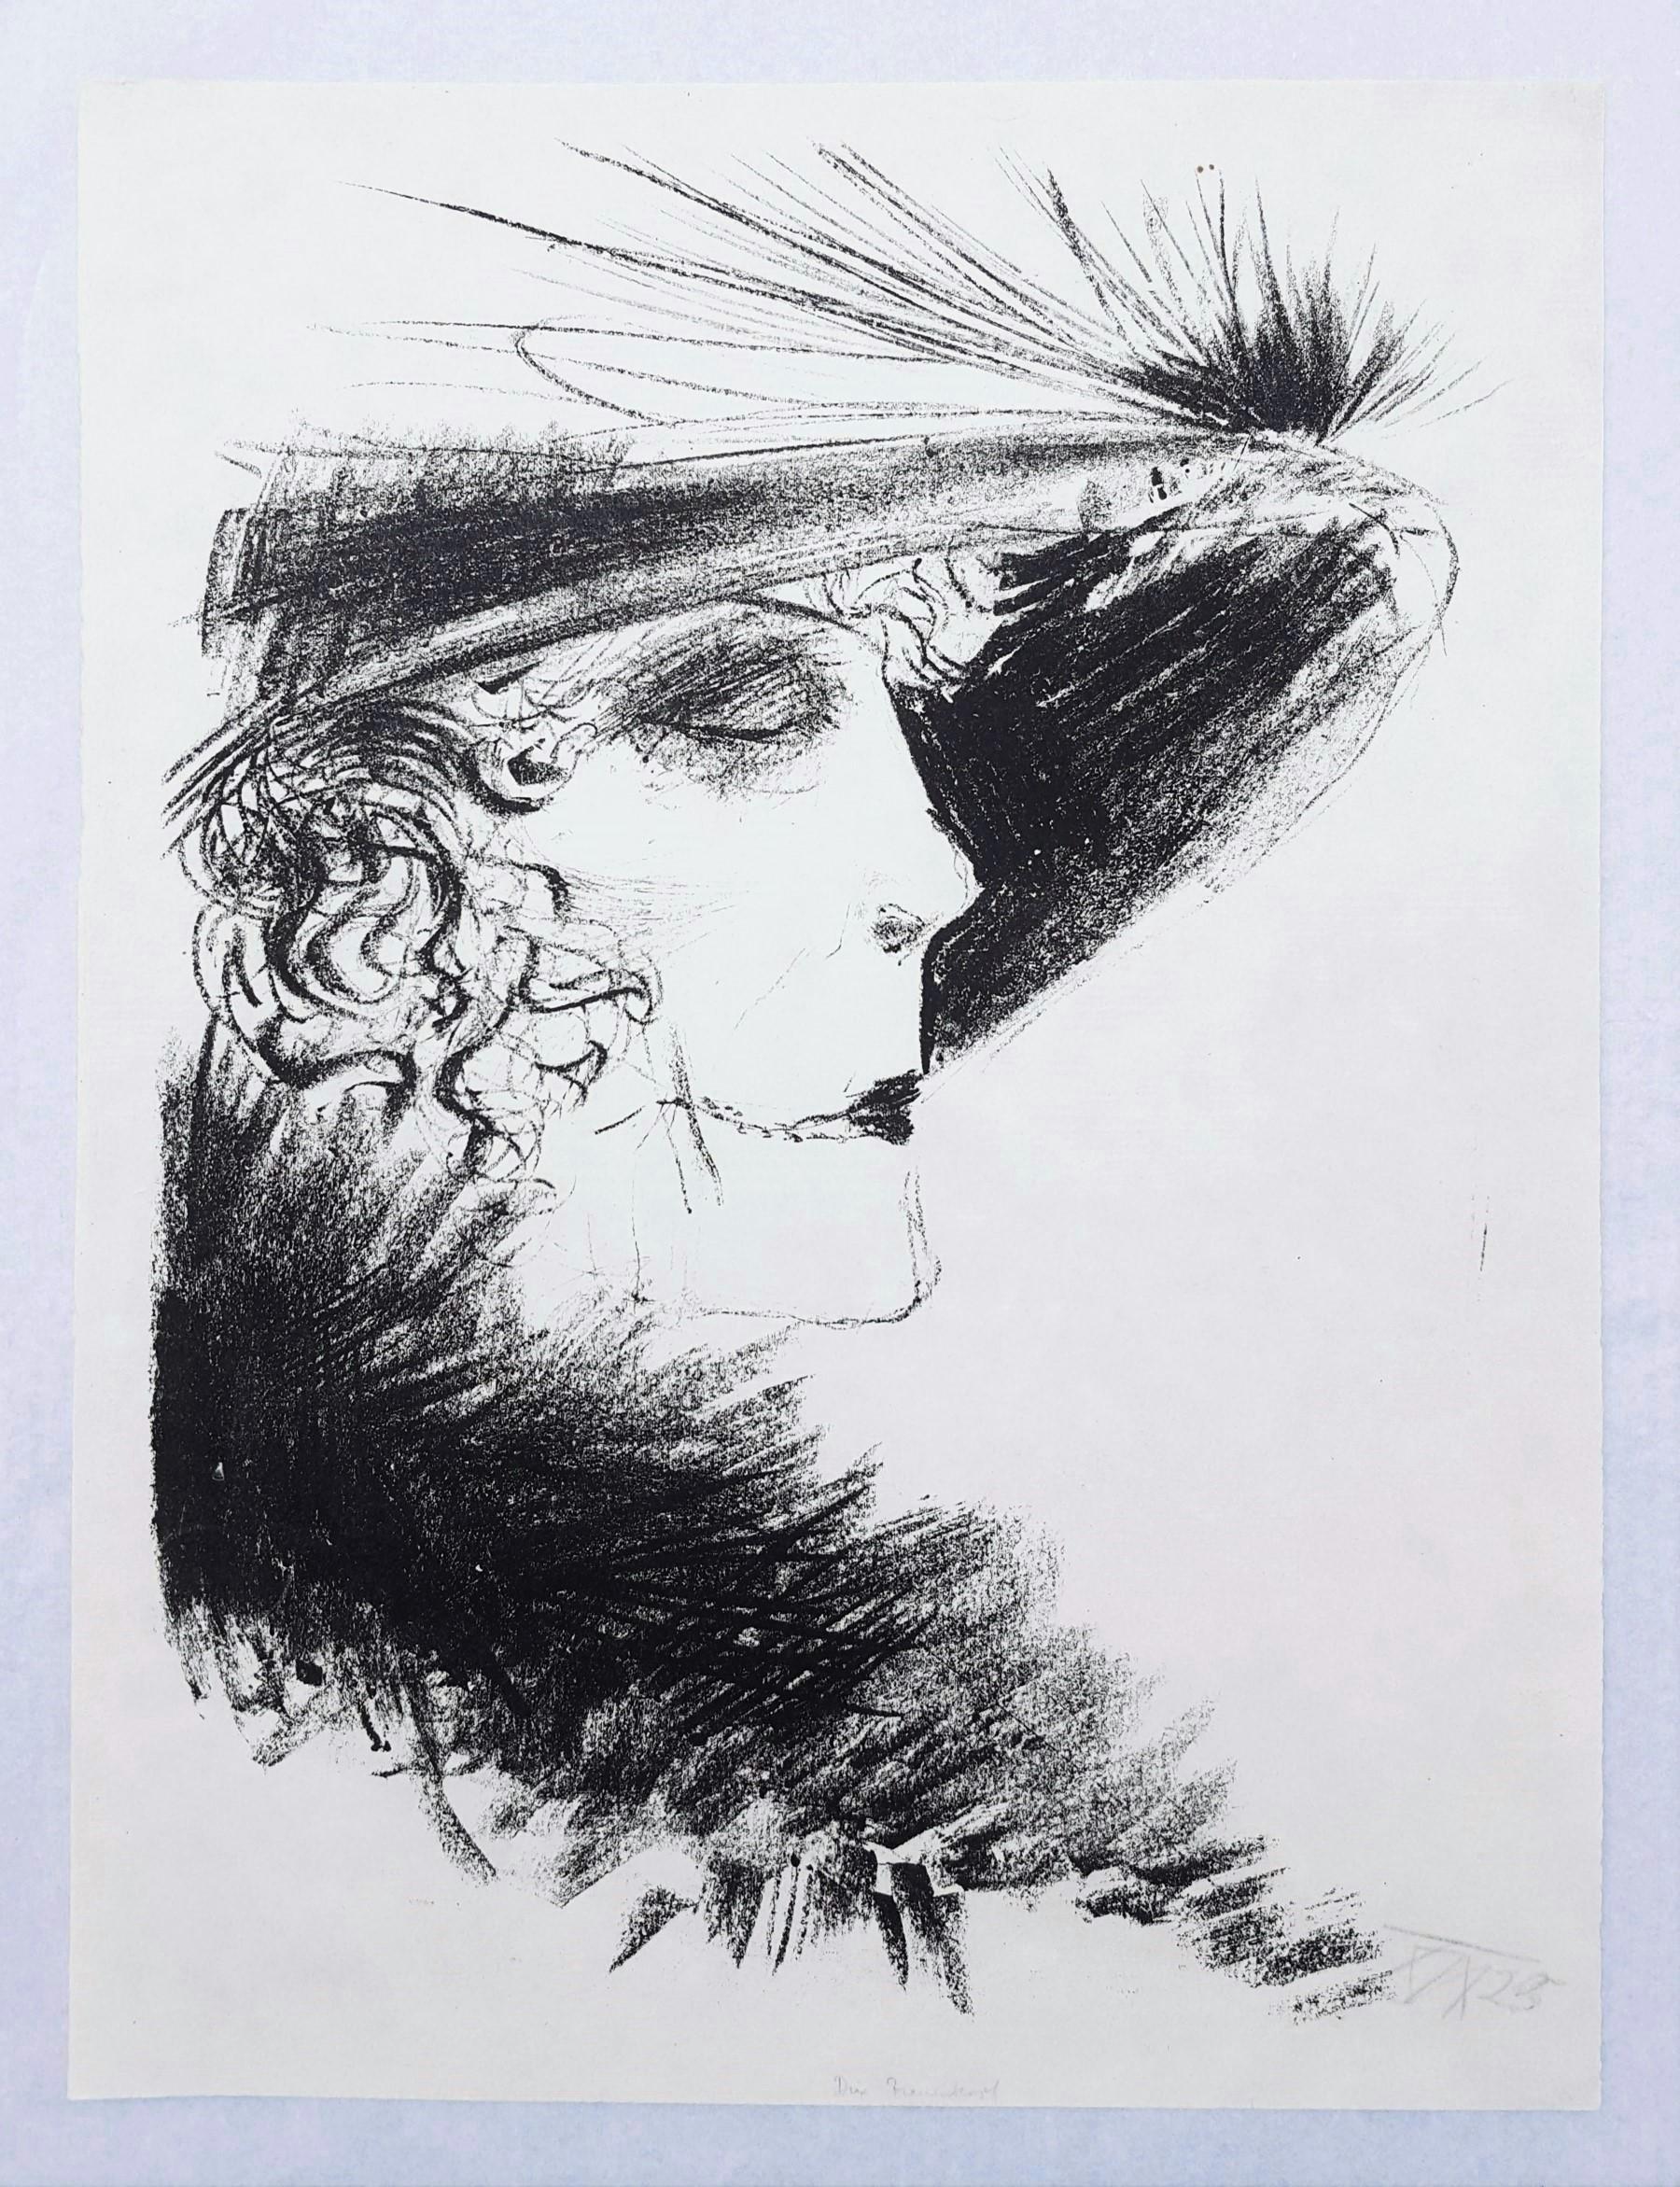 Dame mit Reiher (Woman with a Tuft of Heron Feathers) /// German Expressionism - Print by Otto Dix